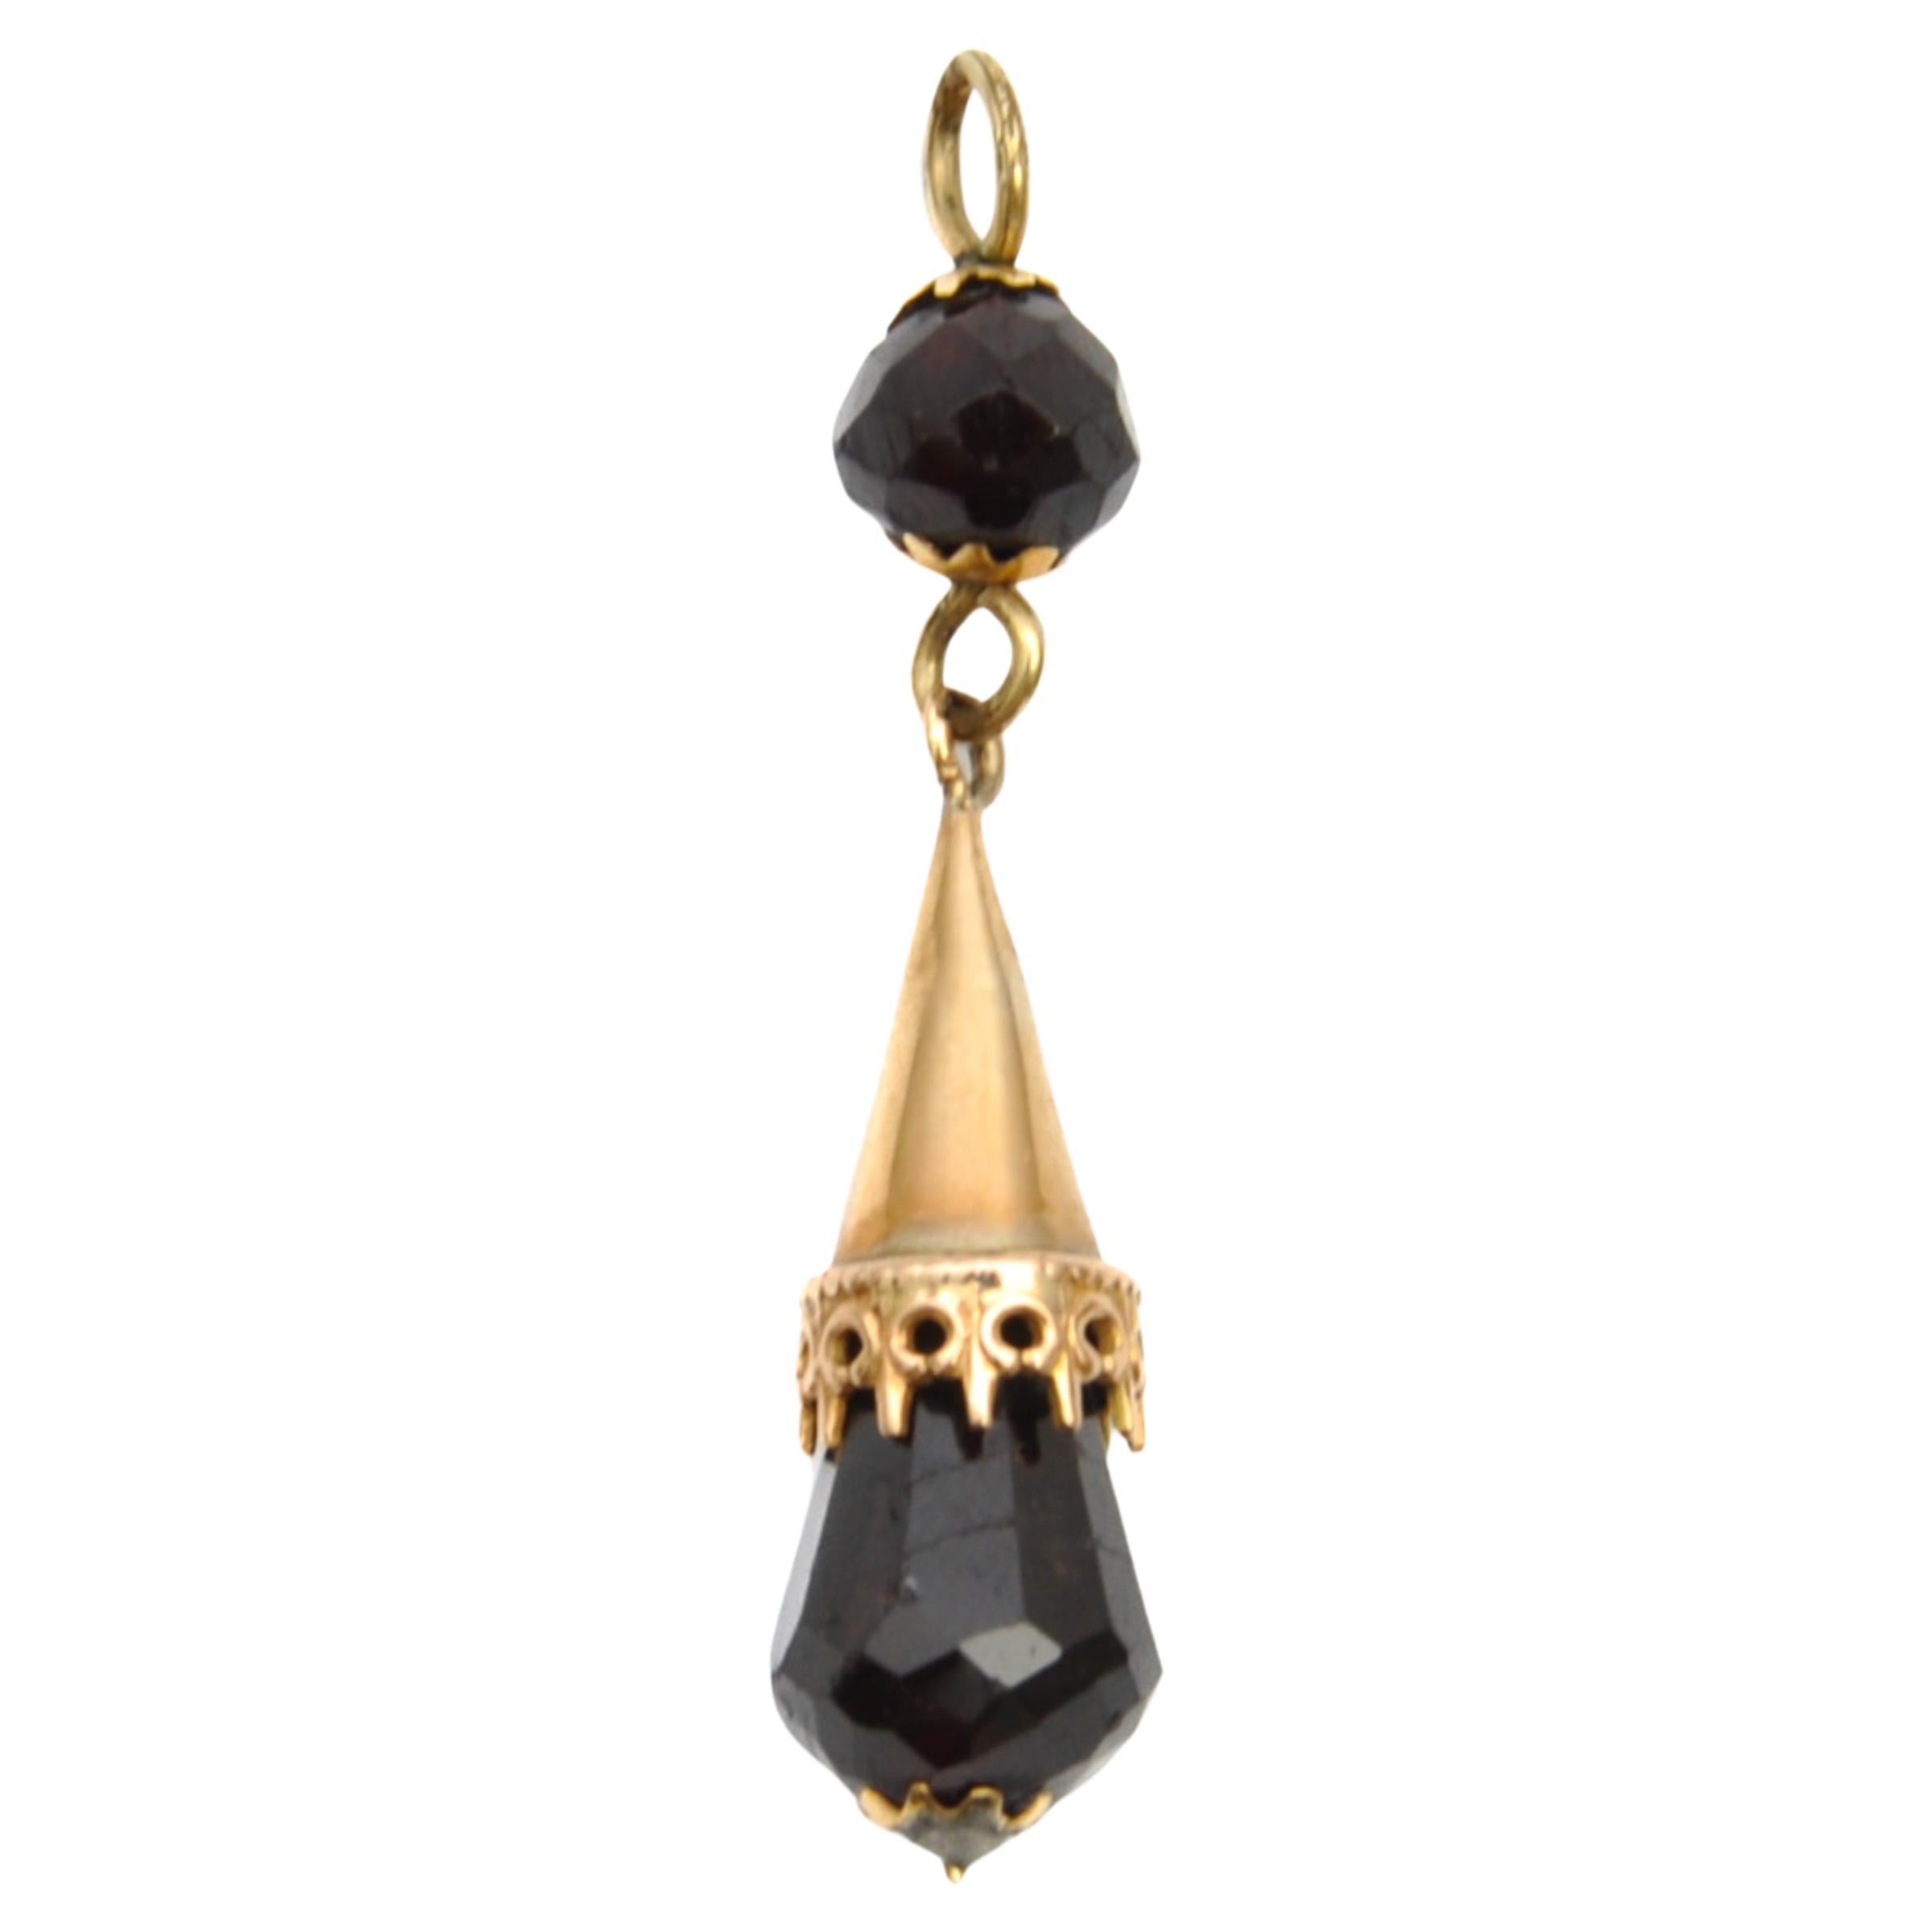 Antique Gold, Garnet and Pearl Pendant For Sale at 1stDibs